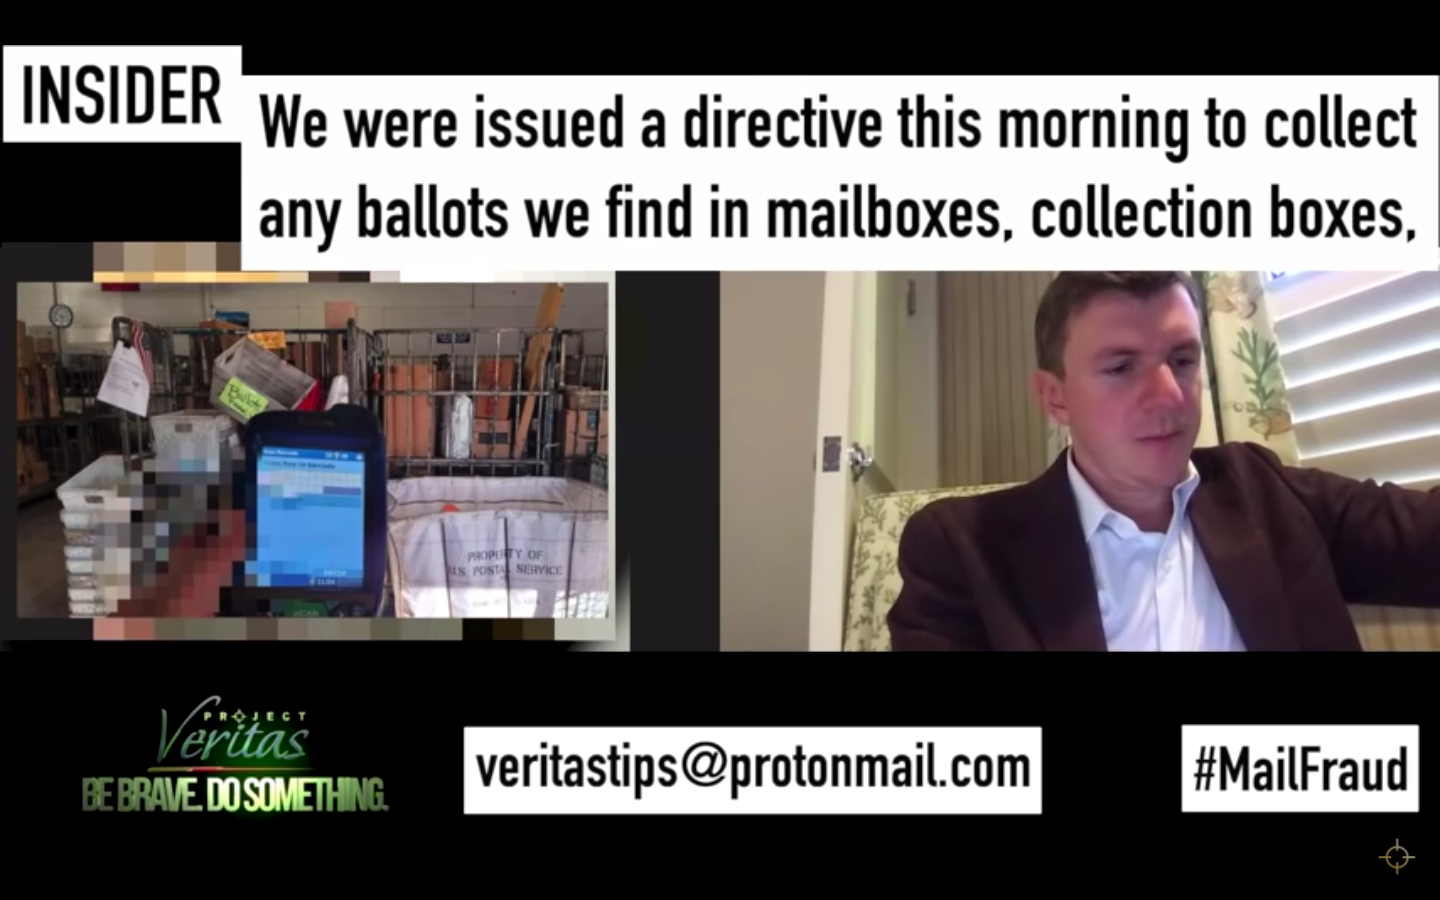 Project Veritas Exposes Corrupt Postal Scheme To Stamp Late Ballots As Received On Time